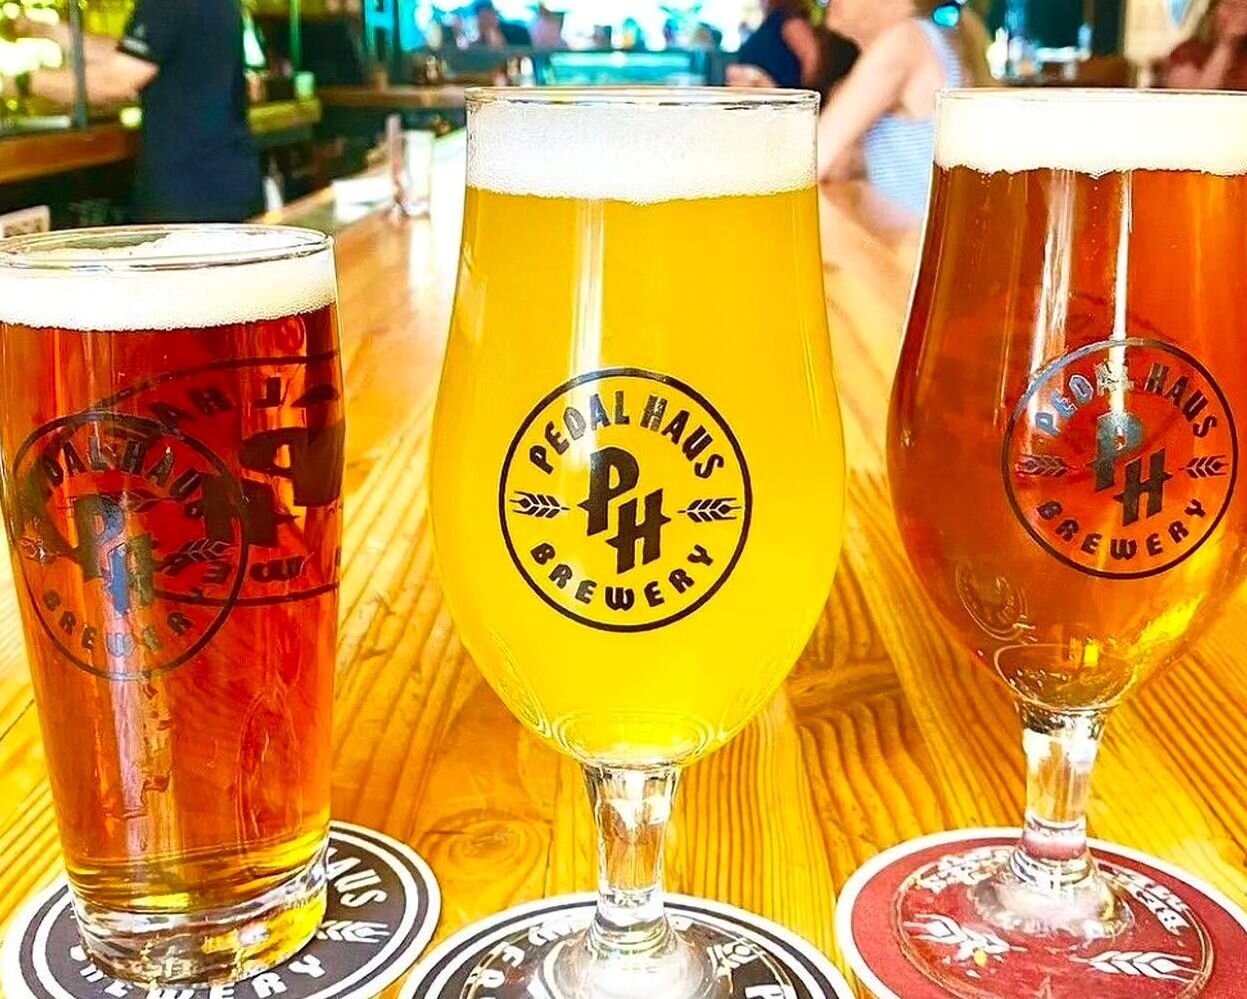 Calling all Beer Lovers! 🍺 @pedalhausbrewery's award-winning beer selection includes a wide range of styles, from classic German lagers to experimental IPAs, all crafted with the finest ingredients and traditional brewing techniques.

Dont forget to